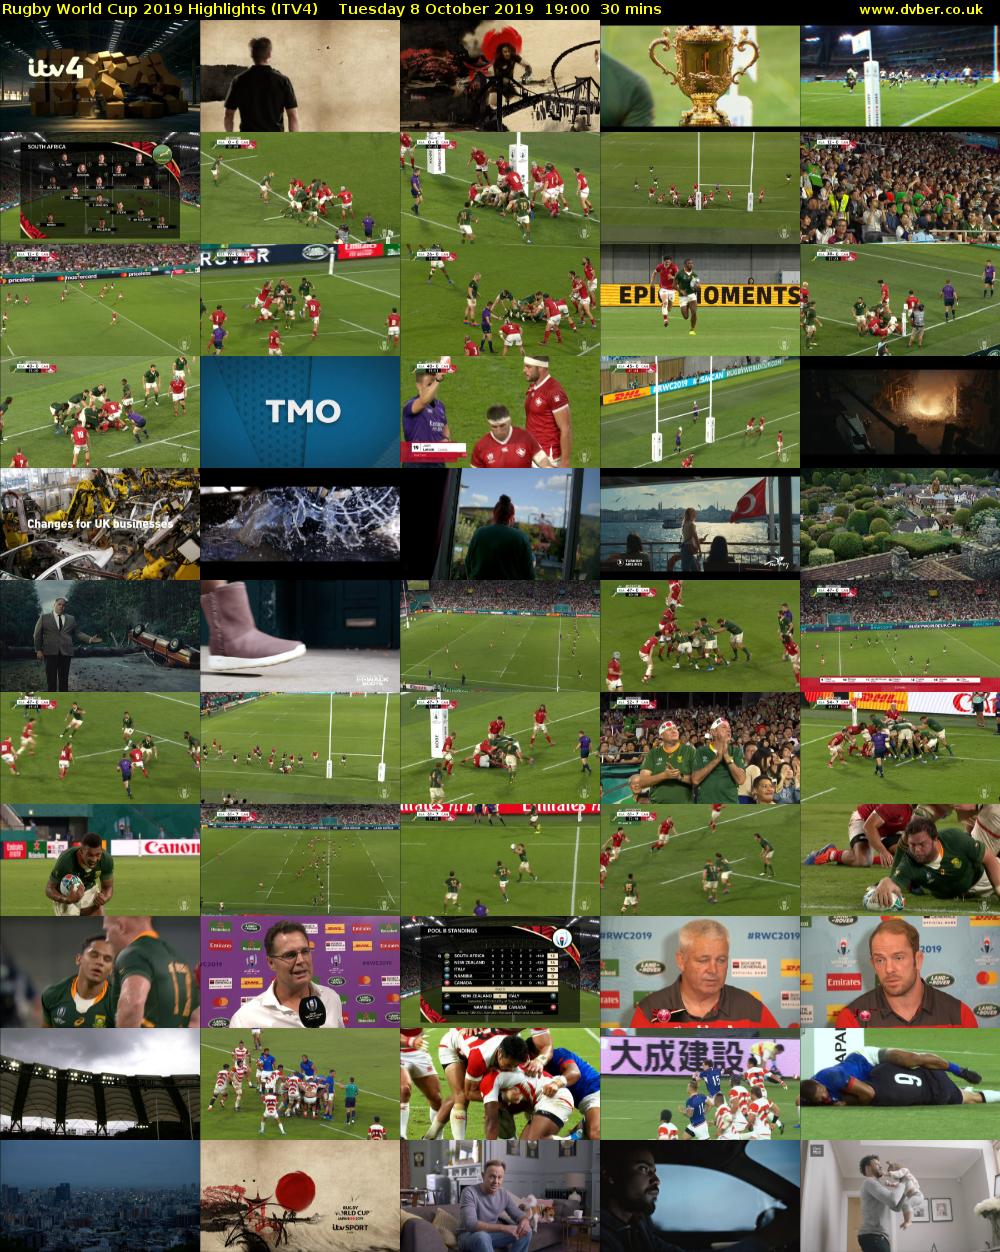 Rugby World Cup 2019 Highlights (ITV4) Tuesday 8 October 2019 19:00 - 19:30